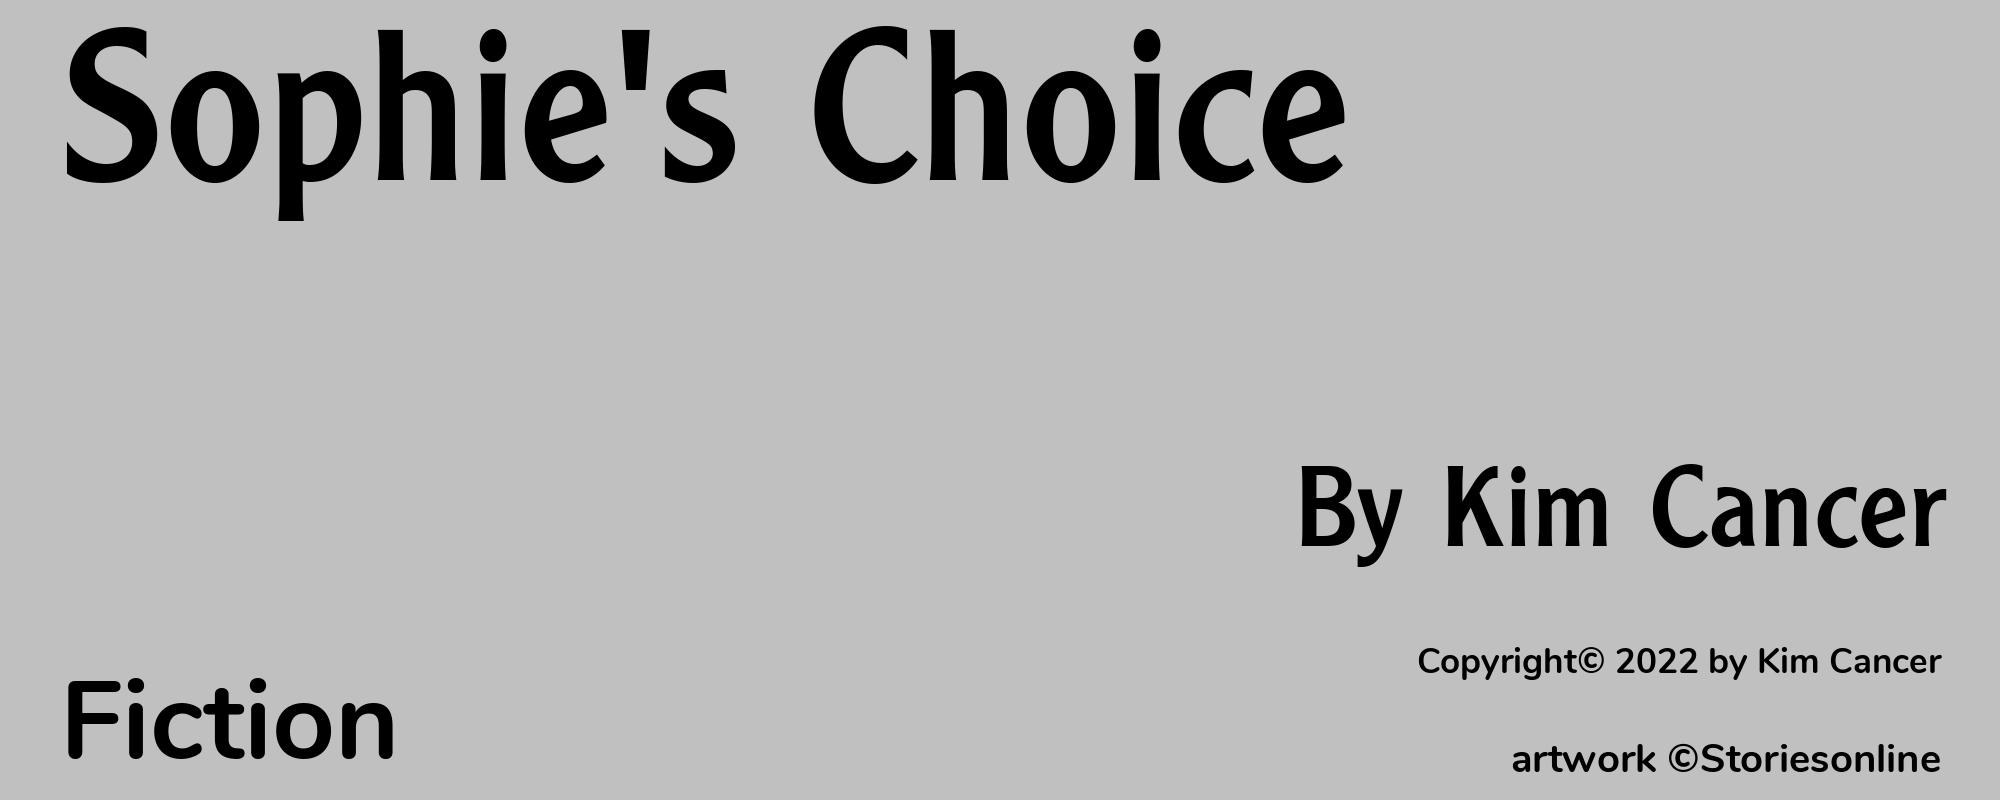 Sophie's Choice - Cover